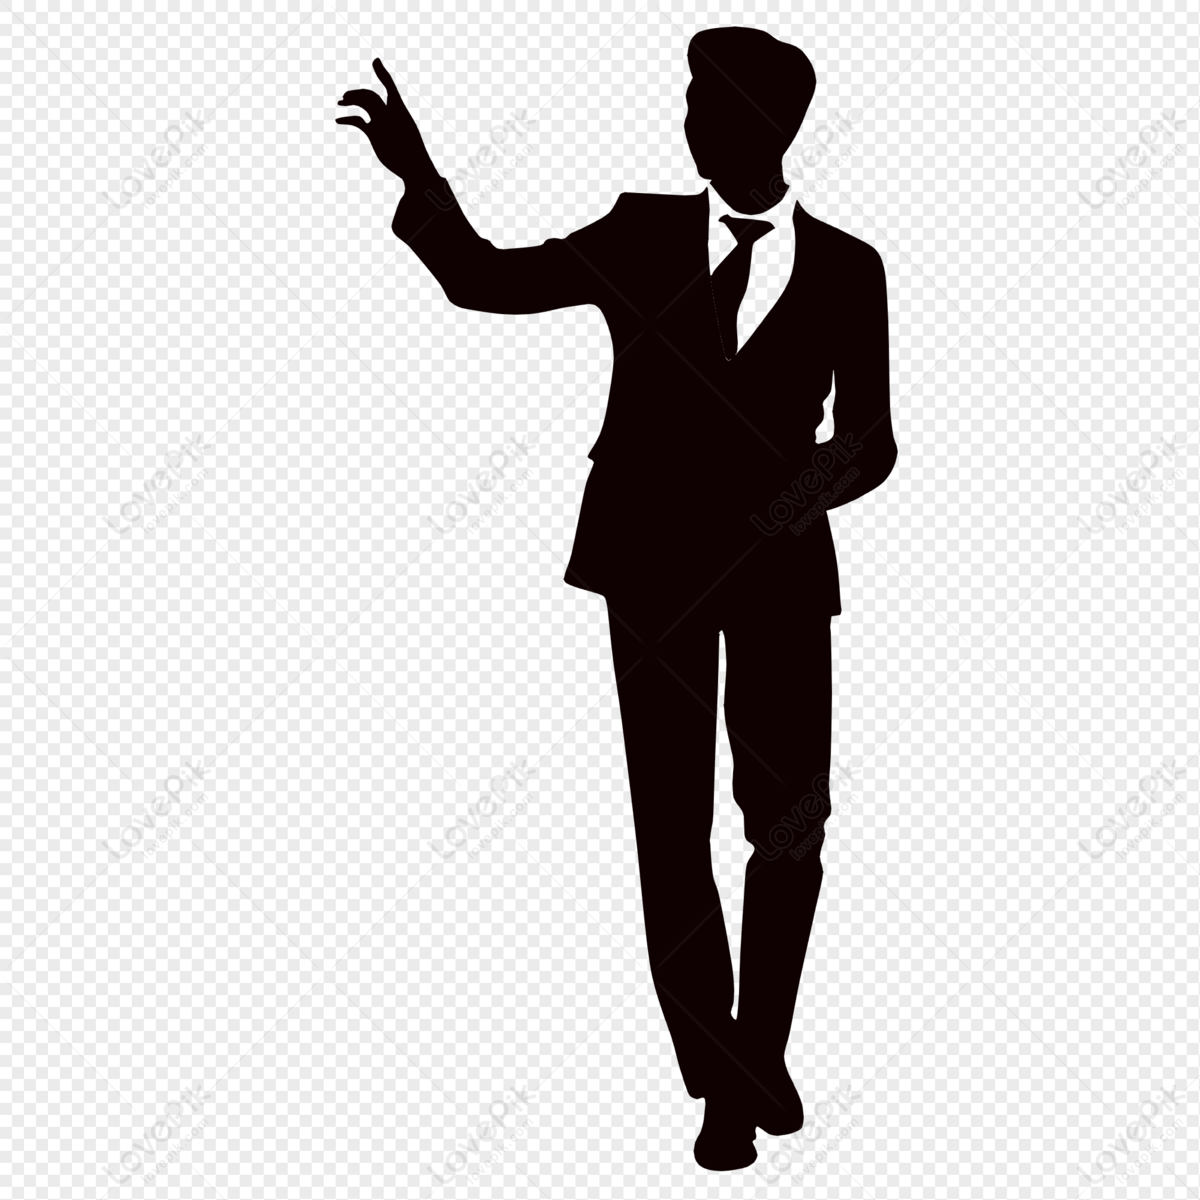 Business people silhouettes, business people, business silhouette, men png image